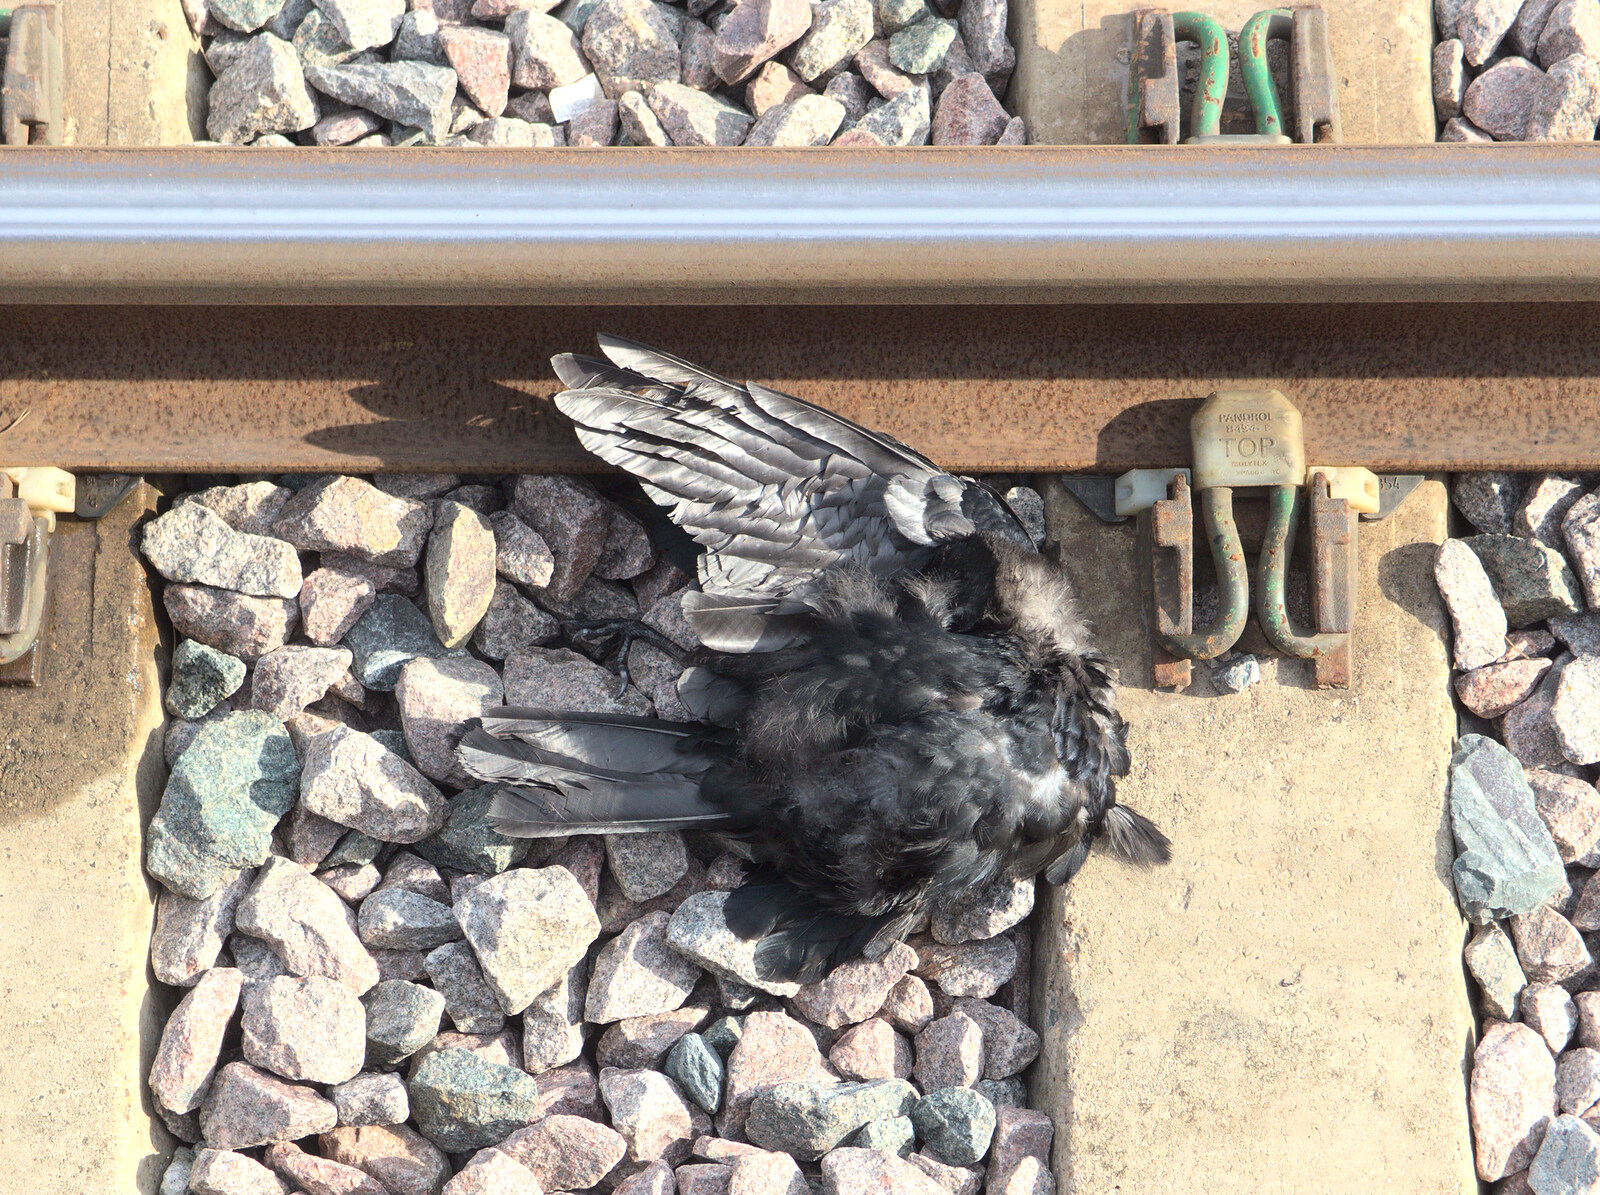 A dead bird on the line adds to the sense of doom from Train Fails, and Pizza Pub, Manningtree and Southwark - 12th August 2014